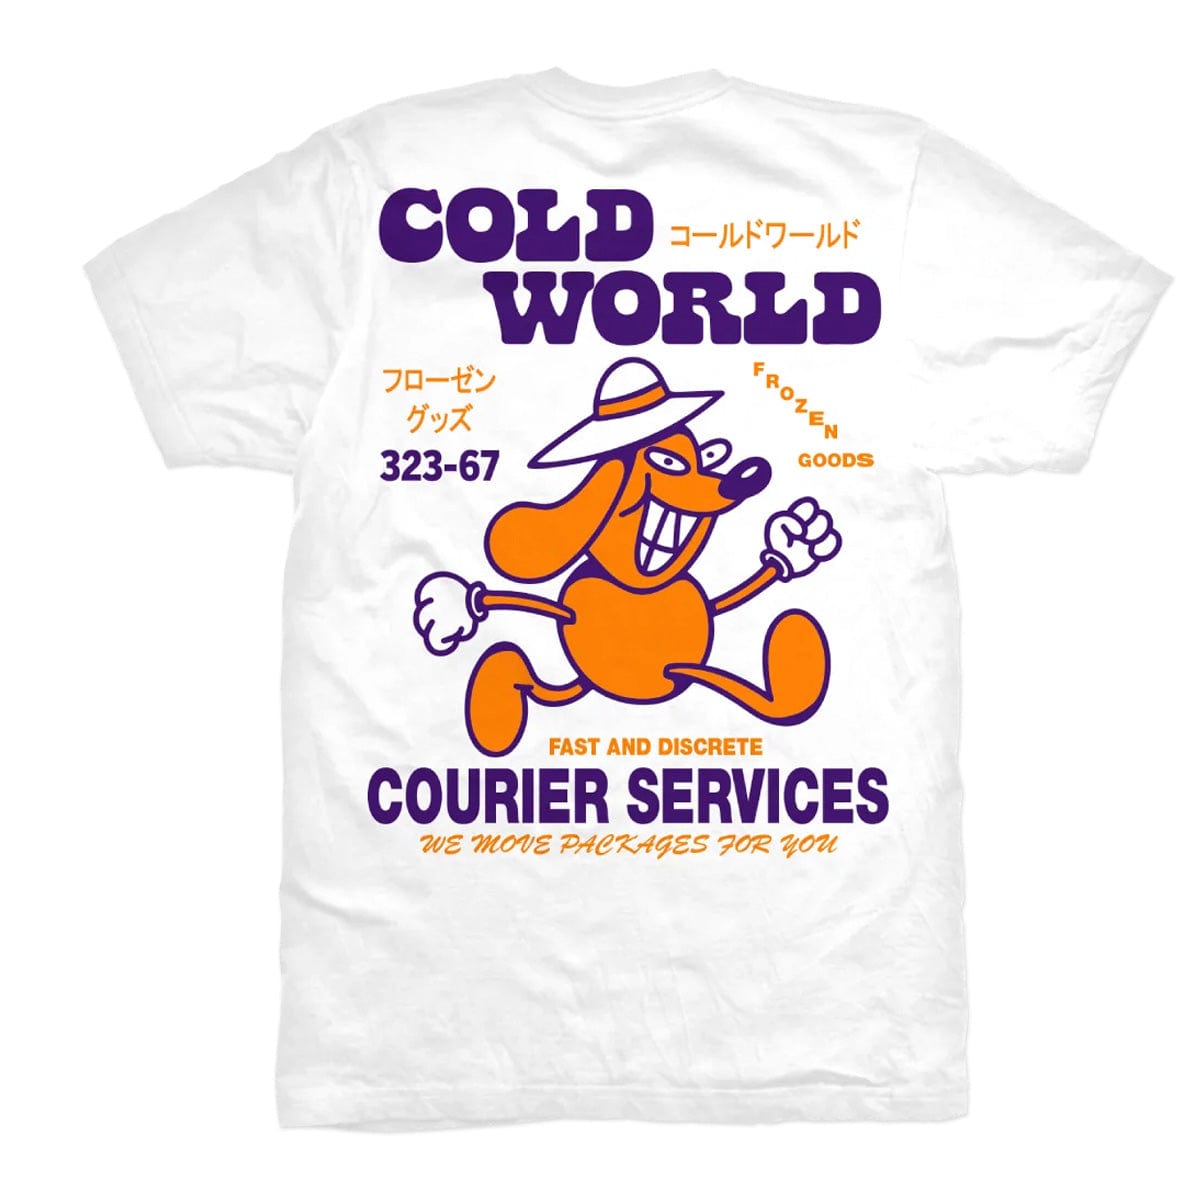 Cold World Frozen Goods T-SHirts COURIER SERVICE TEE